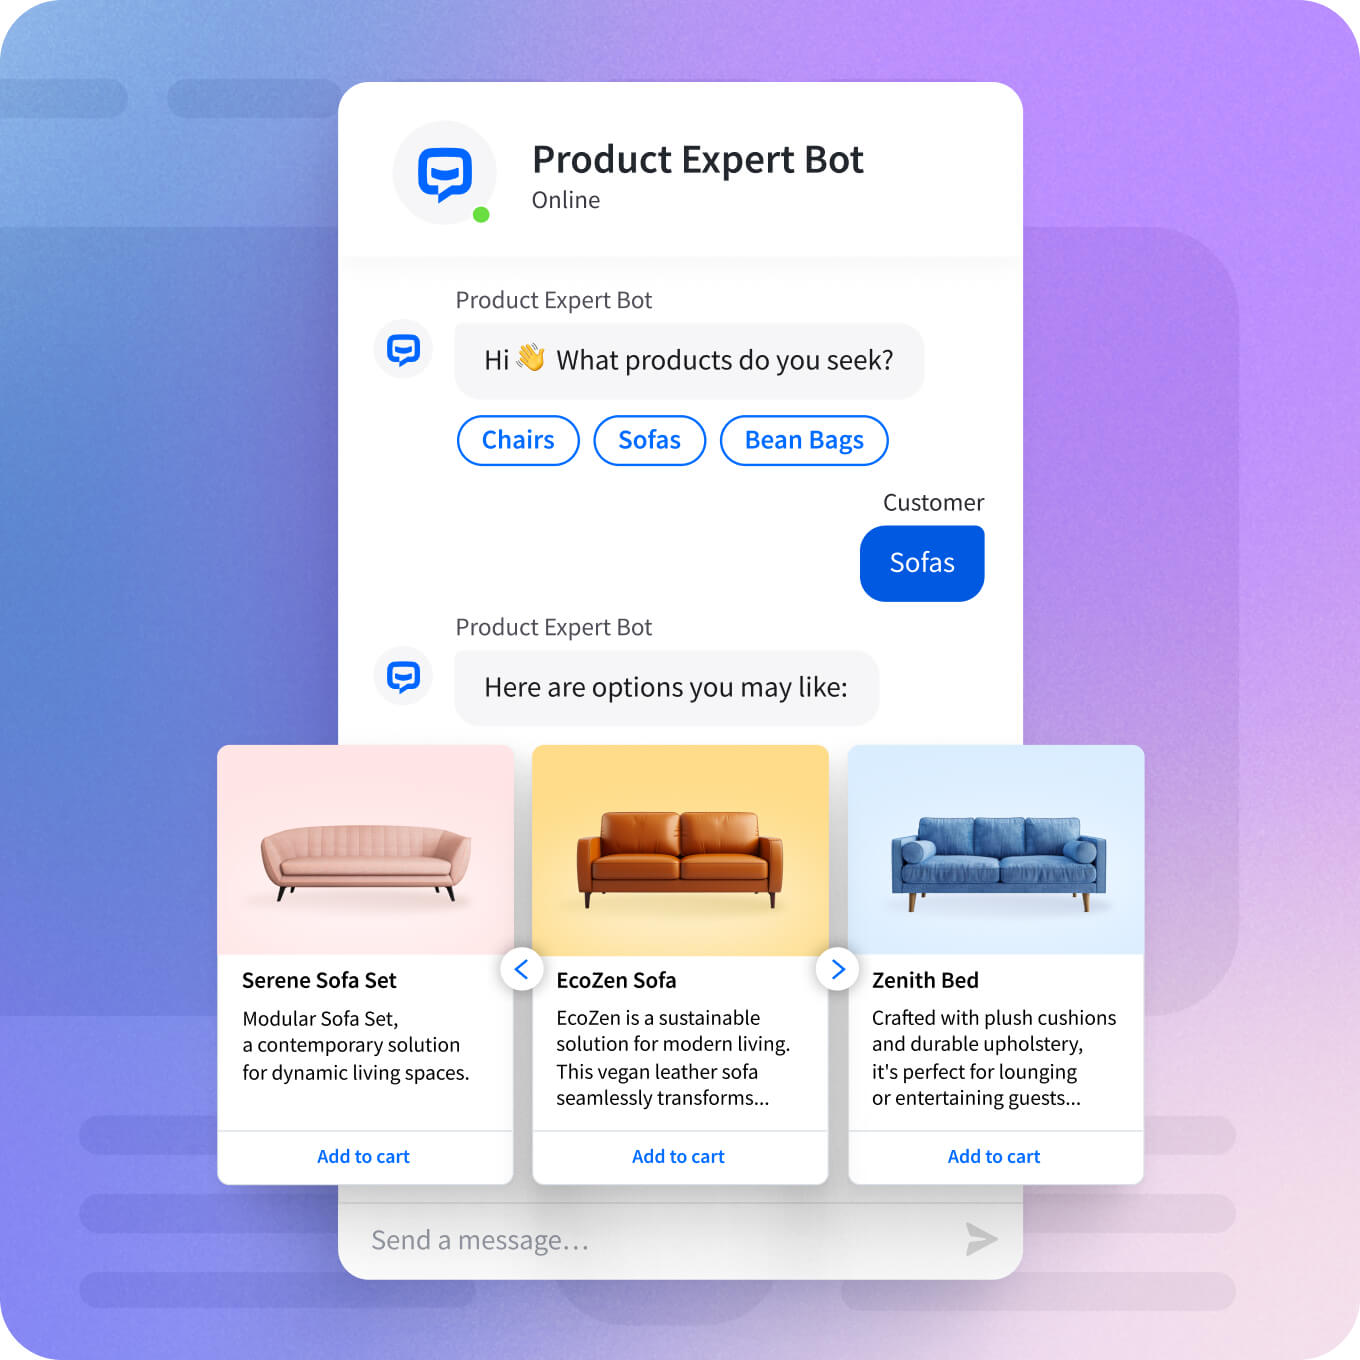 A chat widget with a chatbot named 'Product Expert Bot' asking a customer what products they are looking for, displaying options like chairs, sofas, and bean bags, followed by product recommendations including descriptions and 'Add to cart' buttons.